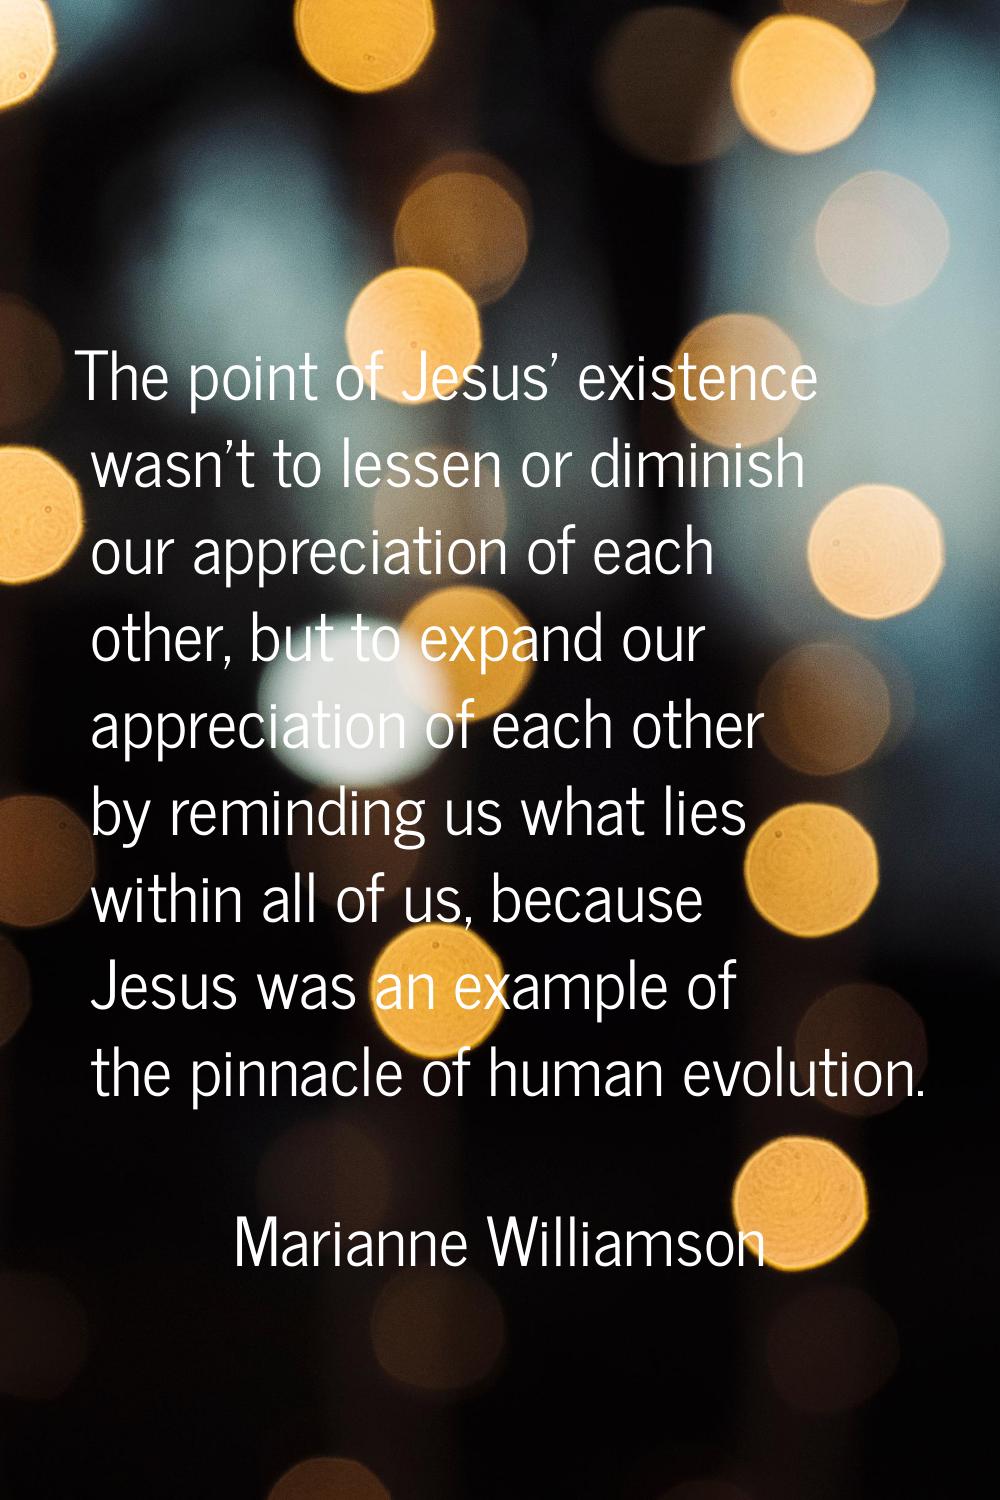 The point of Jesus' existence wasn't to lessen or diminish our appreciation of each other, but to e